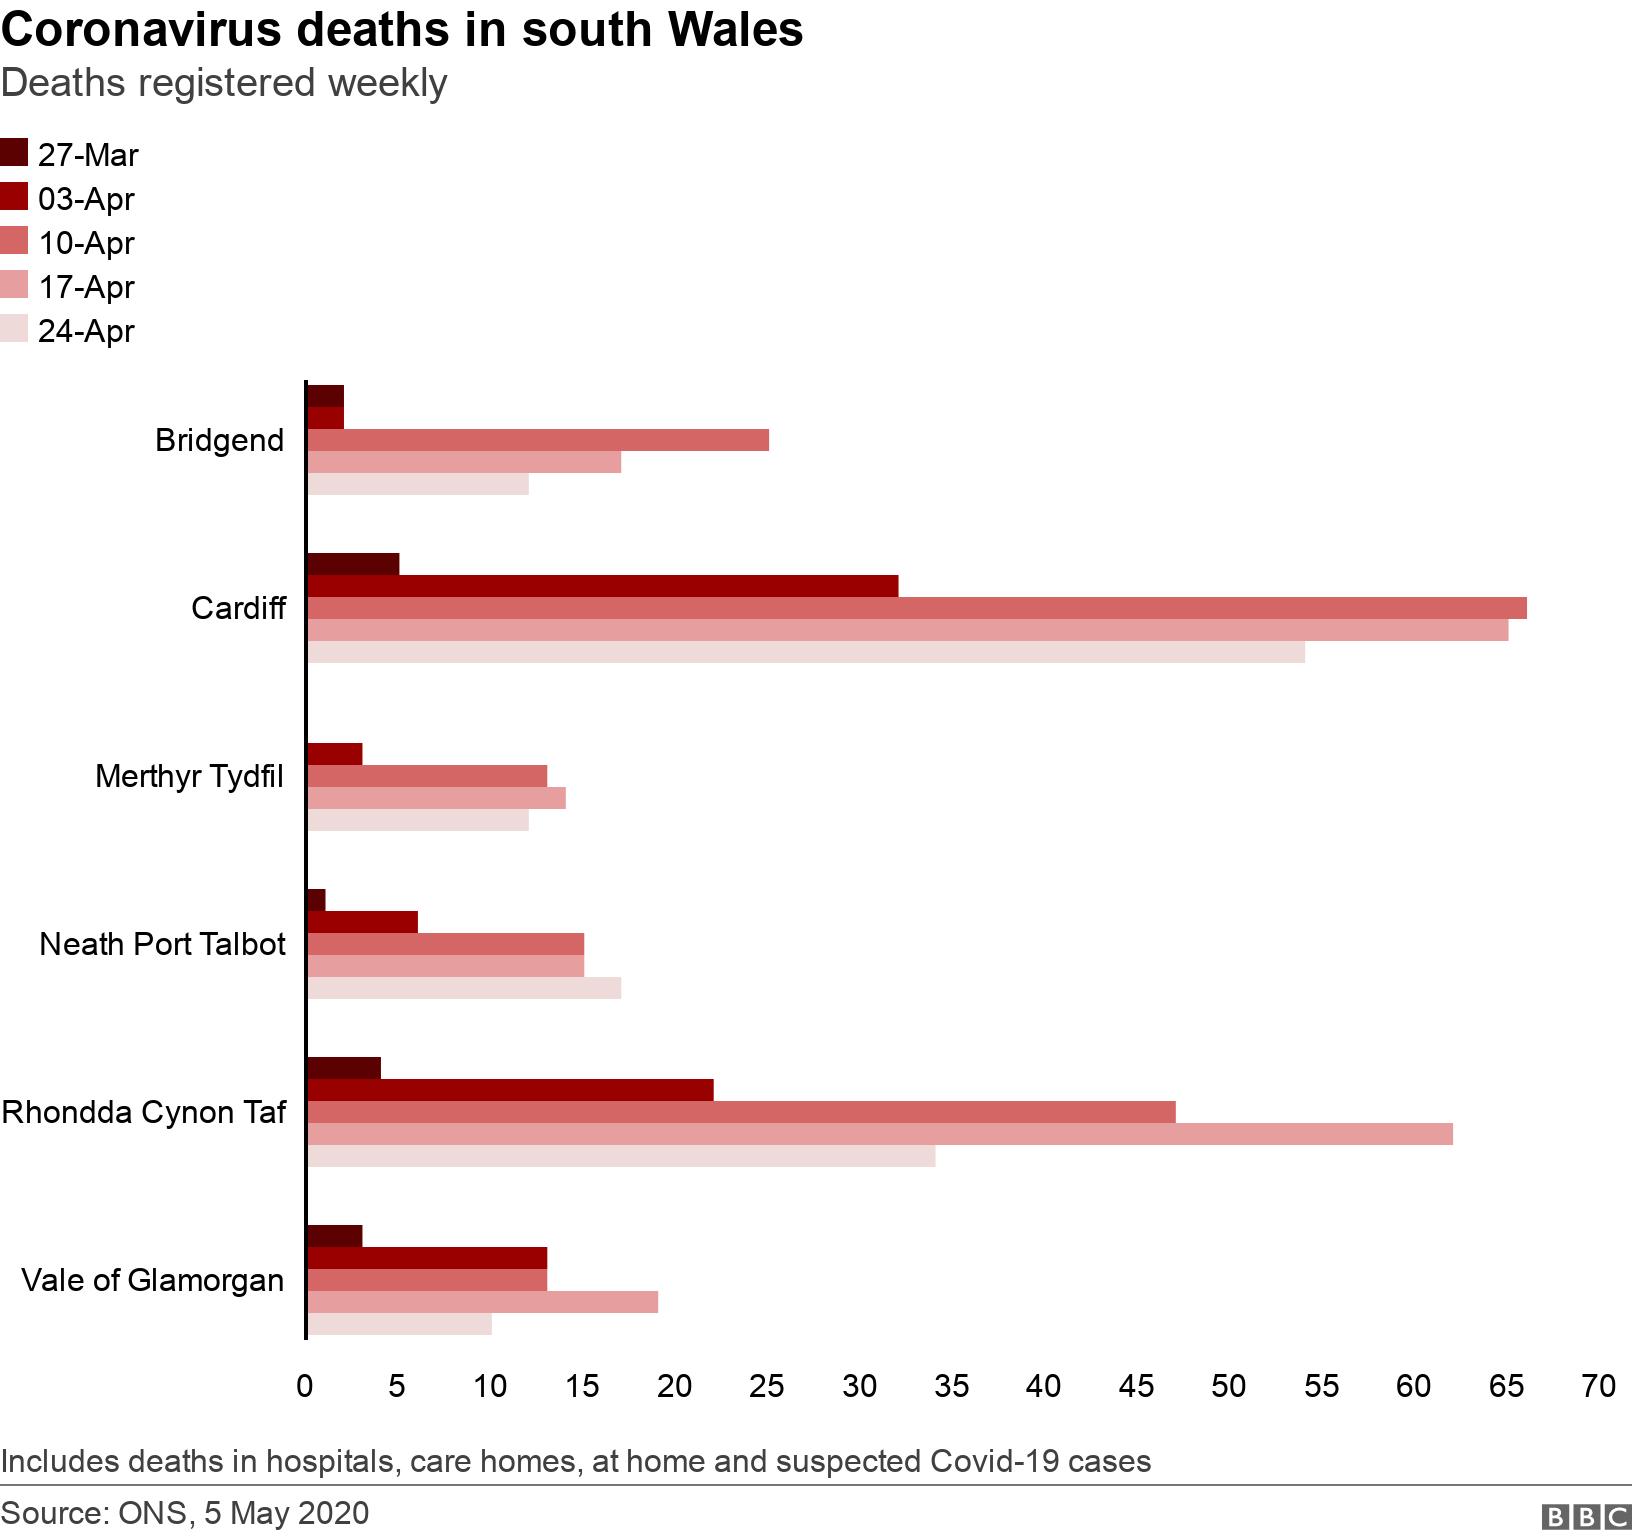 Coronavirus deaths in south Wales. Deaths registered weekly.   Includes deaths in hospitals, care homes, at home and suspected Covid-19 cases.